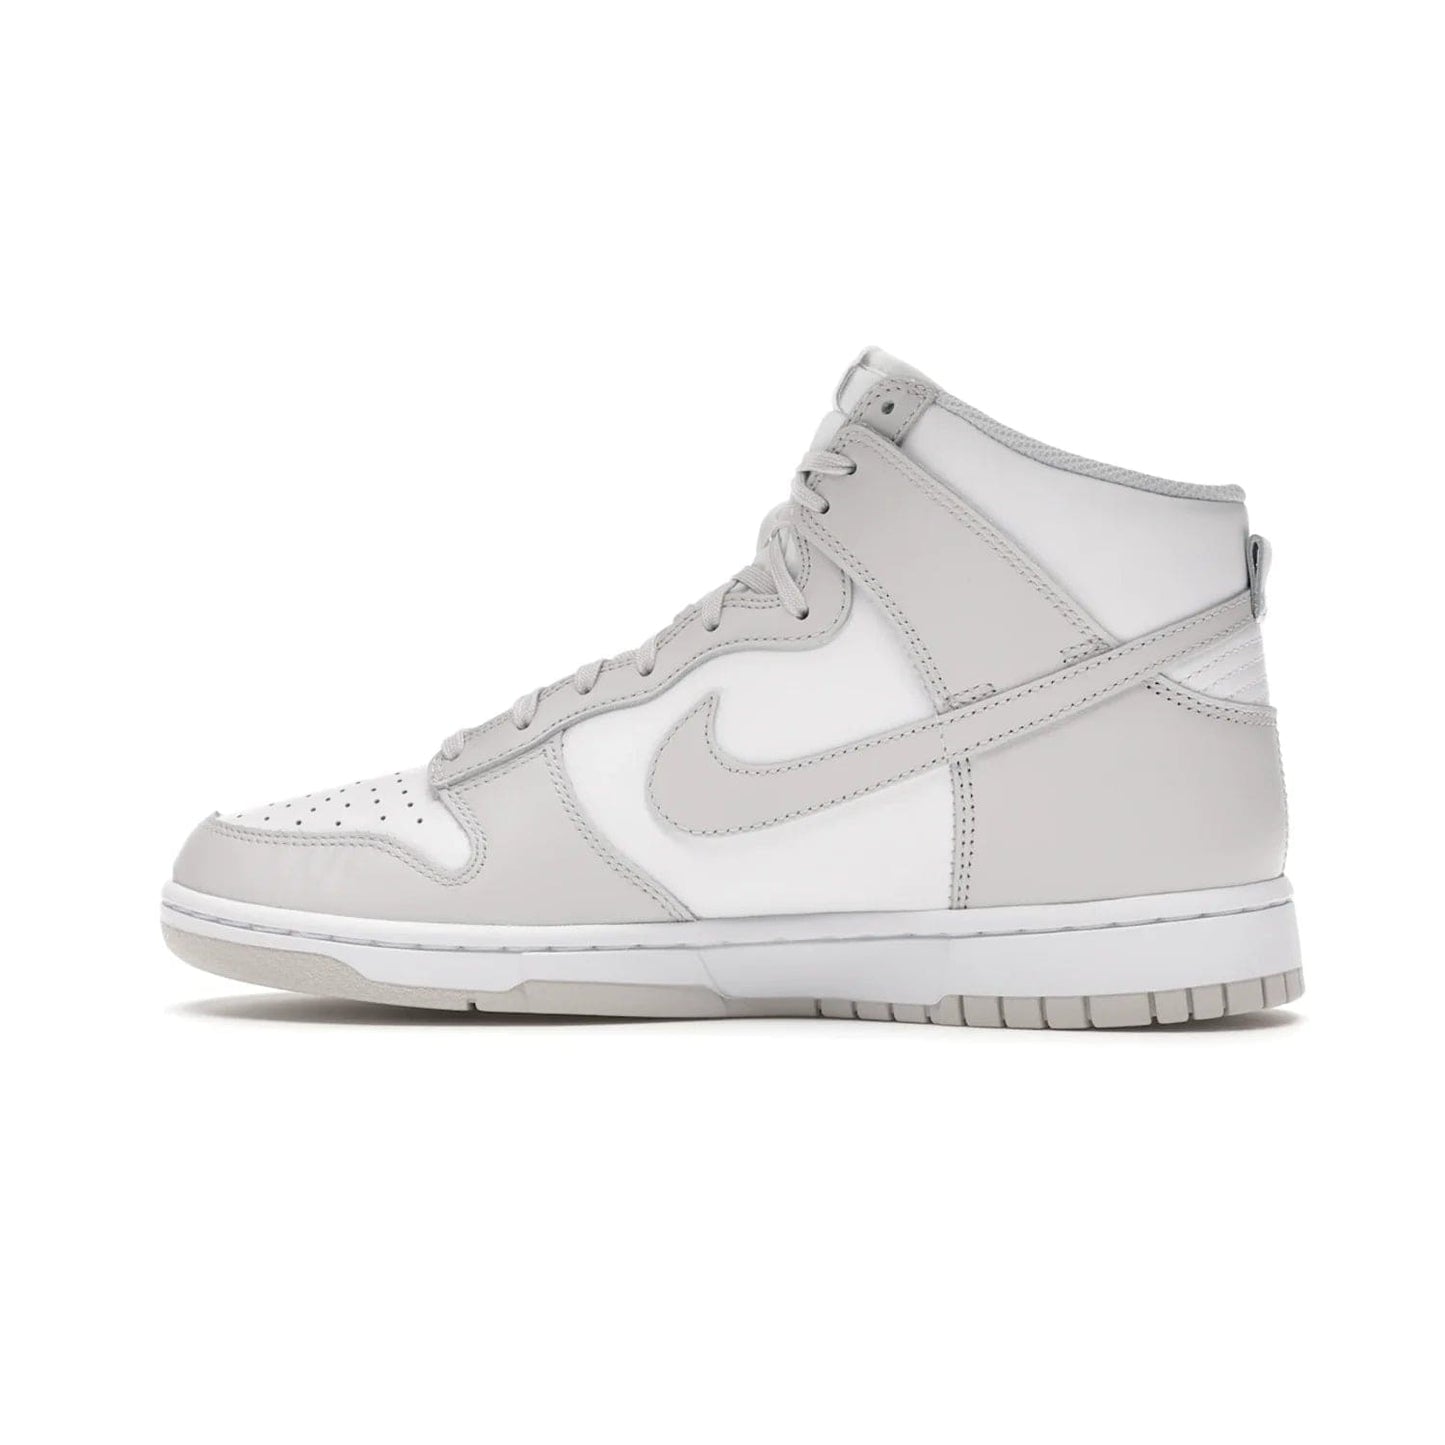 Nike Dunk High Retro White Vast Grey (2021) - Image 20 - Only at www.BallersClubKickz.com - Nike Dunk High Retro White Vast Grey 2021: classic '80s basketball sneaker with a crisp white base, grey overlays, midsole tooling and outsole. Dropped Feb. 2021.